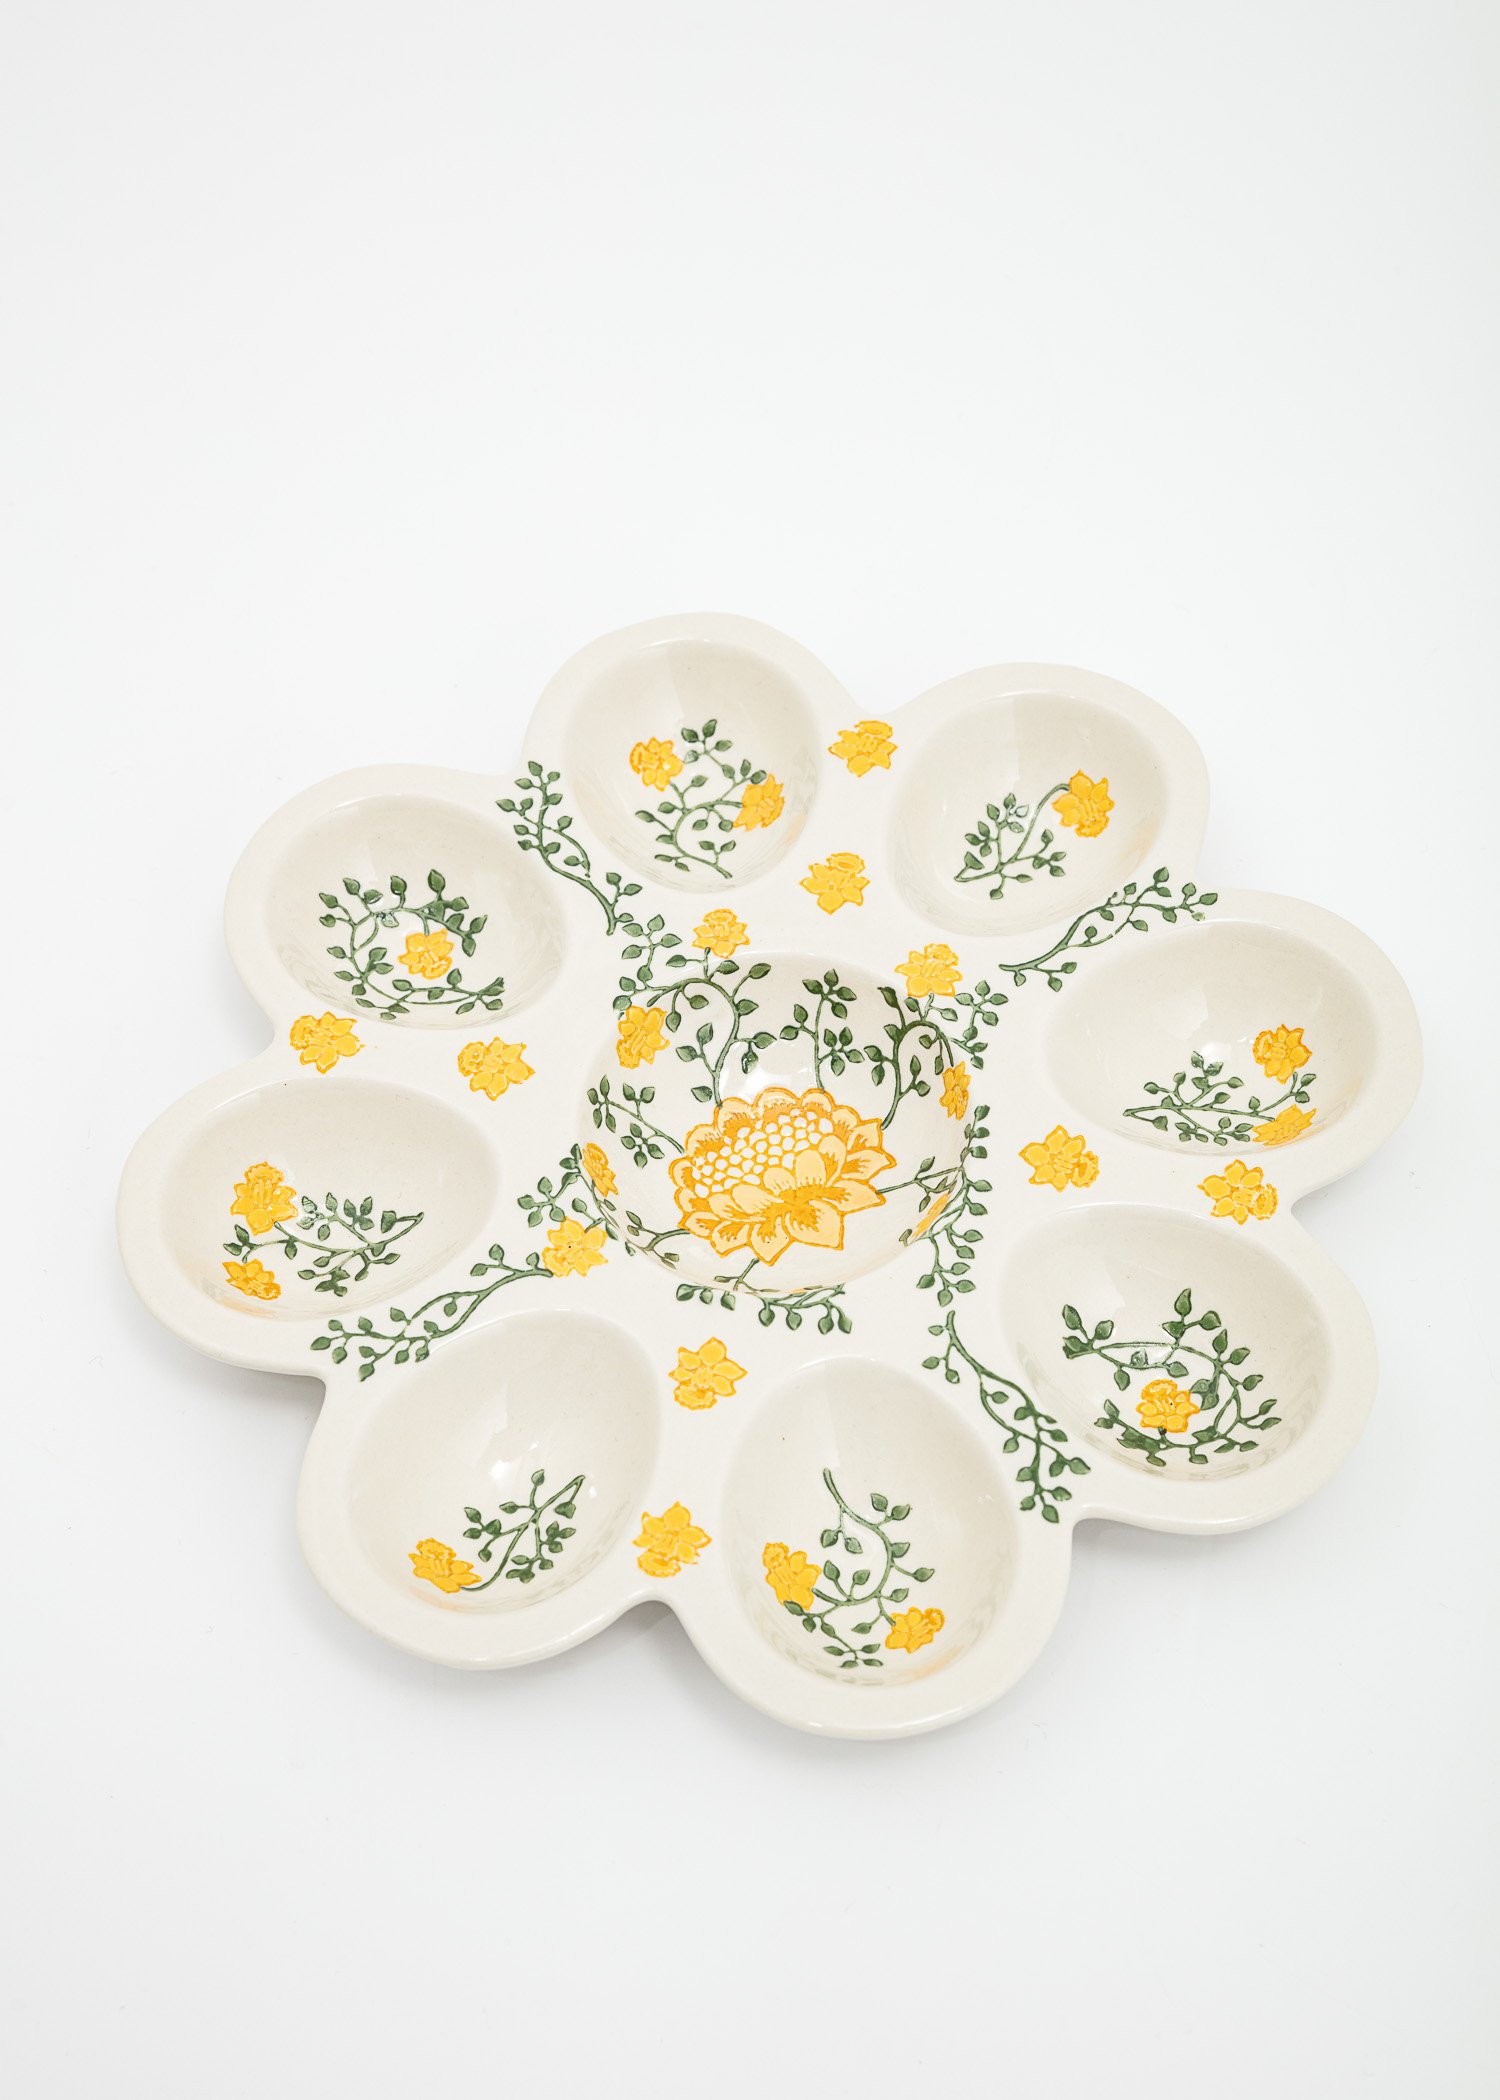 Hand painted egg plate